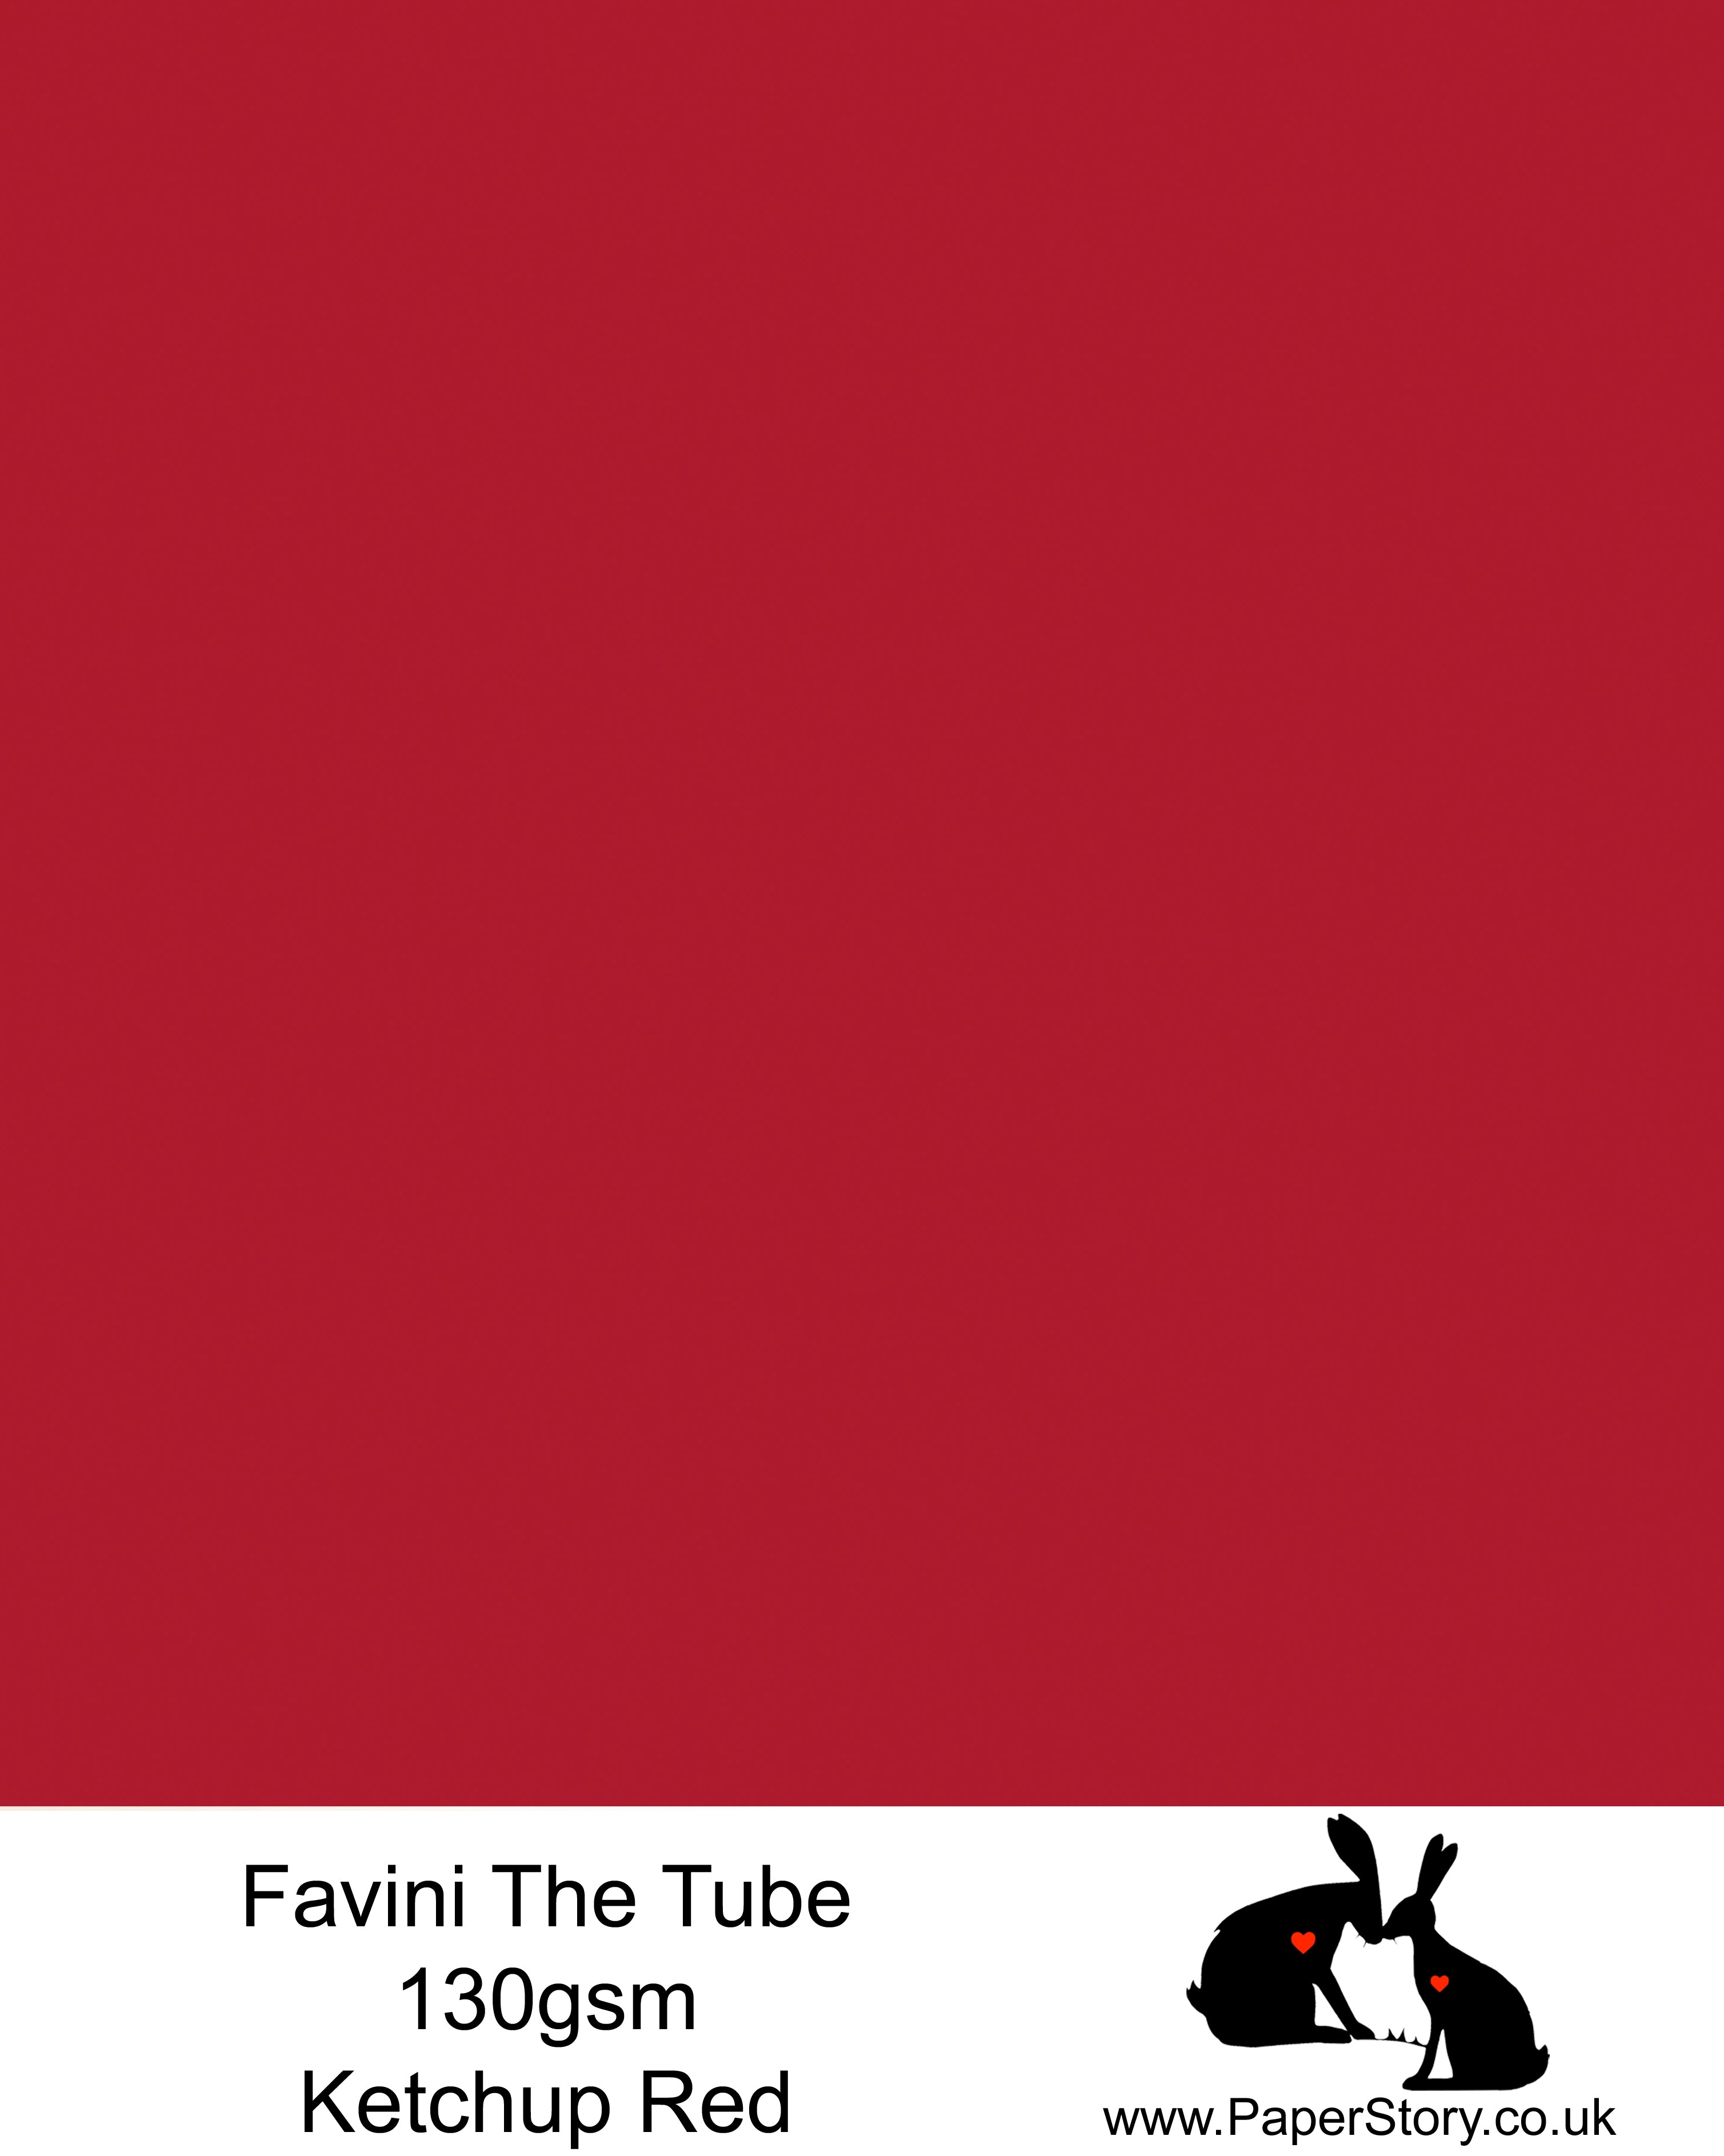 The Tube Favini Ketchup Red, is a stunning deep warm red. is an innovative matte paper and our favourite PaperCutting paper, also be use for foil and screen blocking. The subtle soft touch of this paper provides an elegance unsurpassed by any other paper.